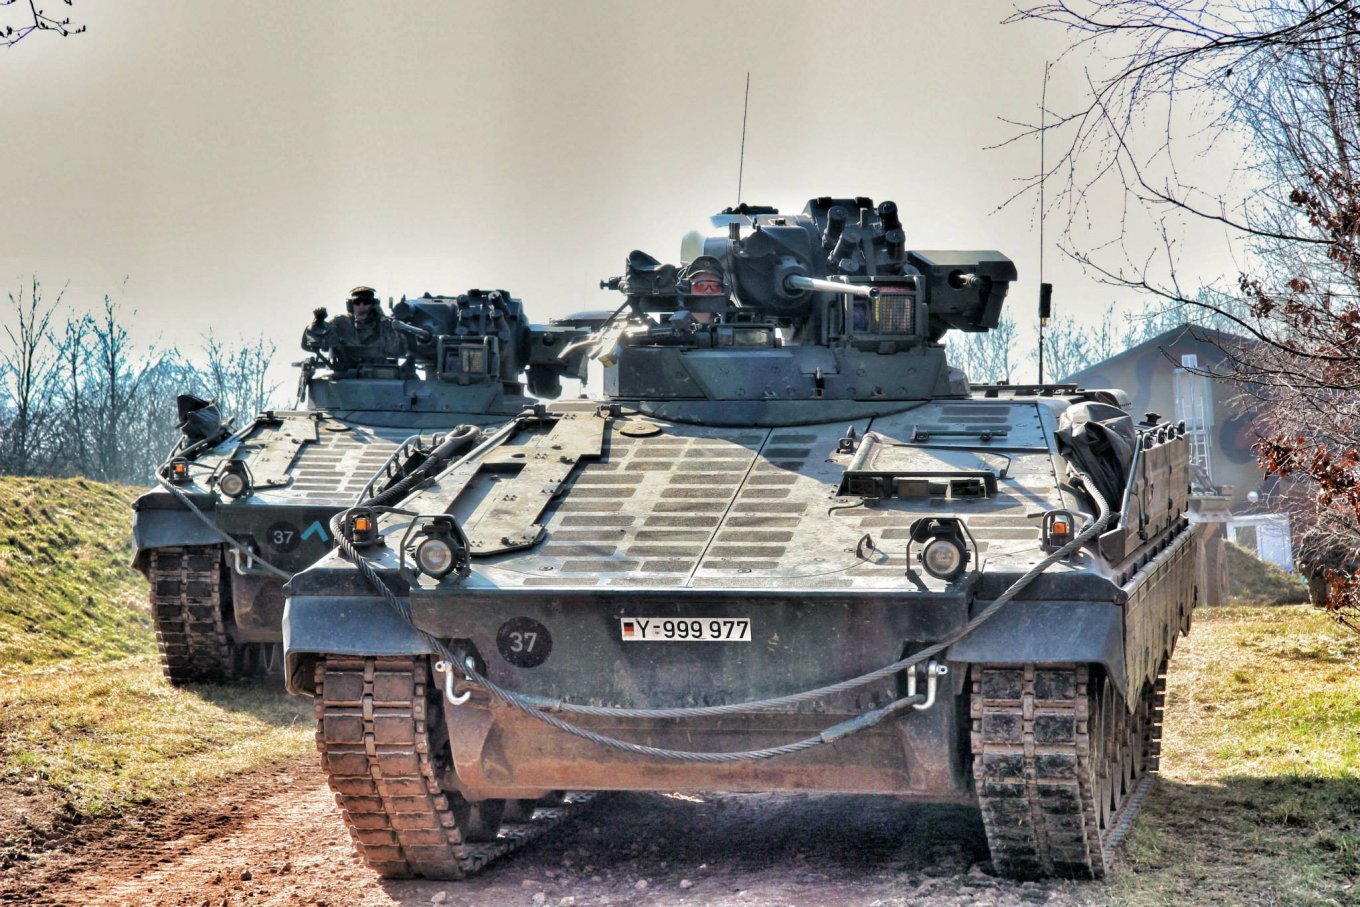 Rheinmetall Announced the Stockpiles of Leopard 1 And Leopard 2 Tanks, Marder Infantry Fighting Vehicles And the Timelines For Their Restoration, Defense Express, war in Ukraine, Russian-Ukrainian war